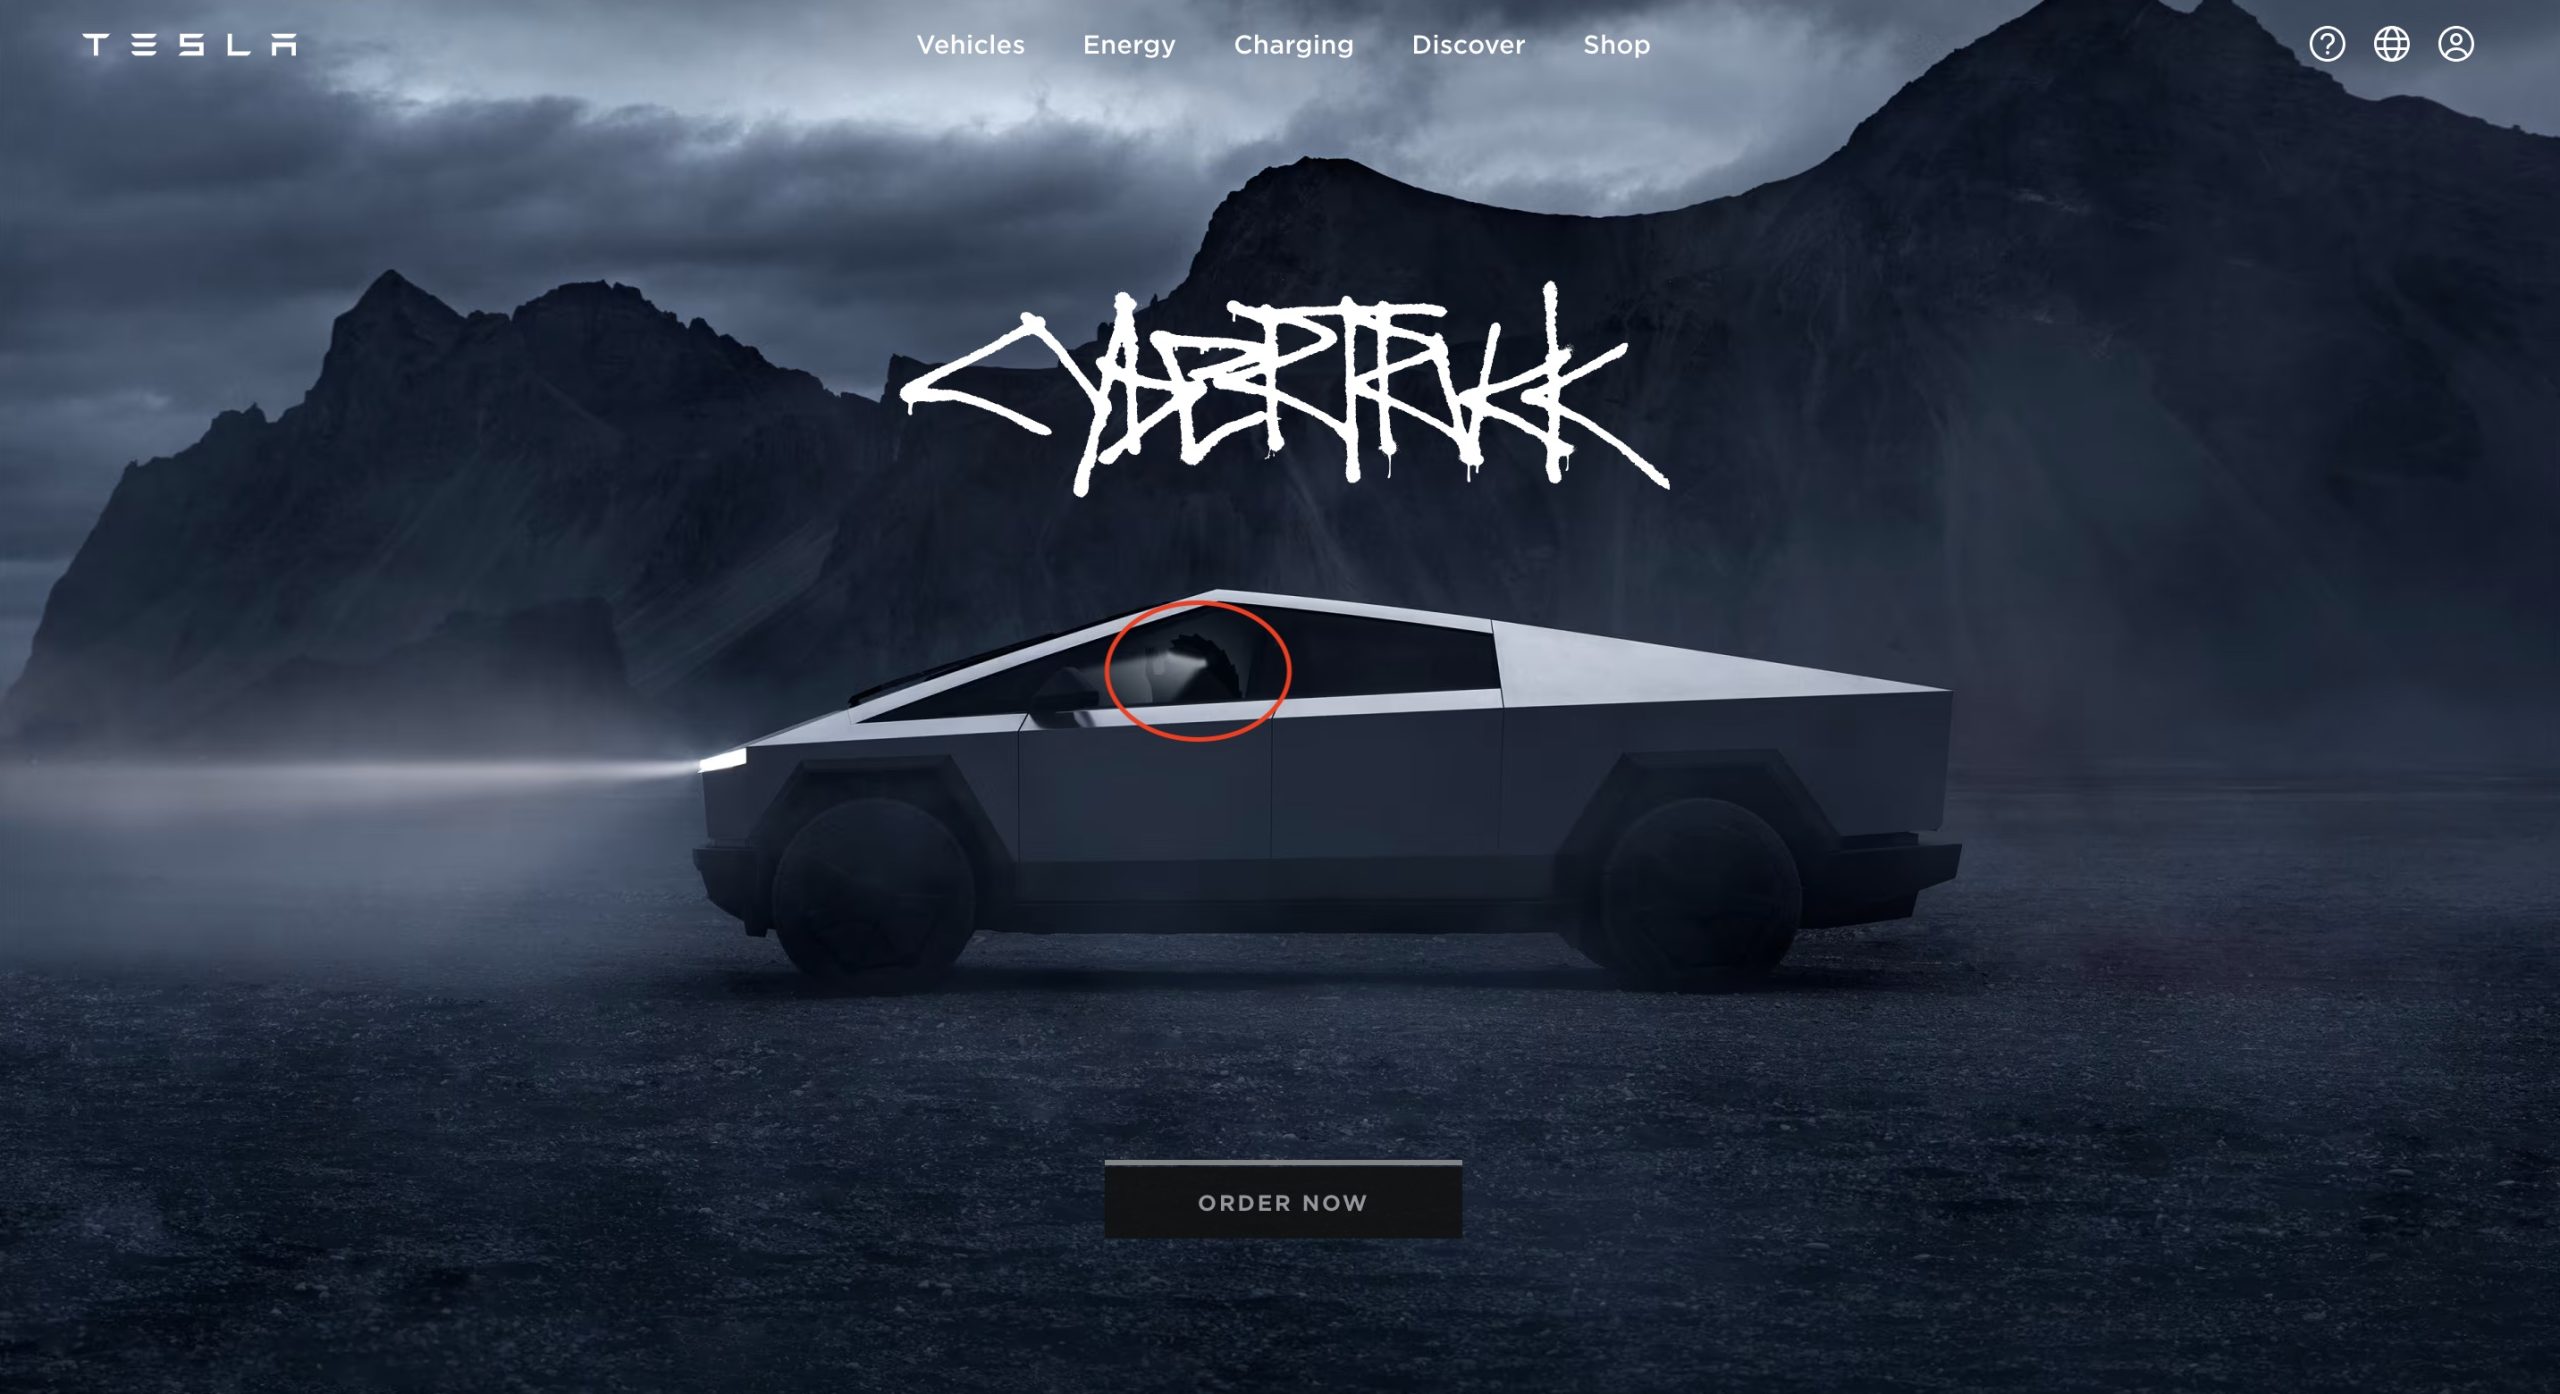 Tesla Cybertruck official page has a fun easter egg